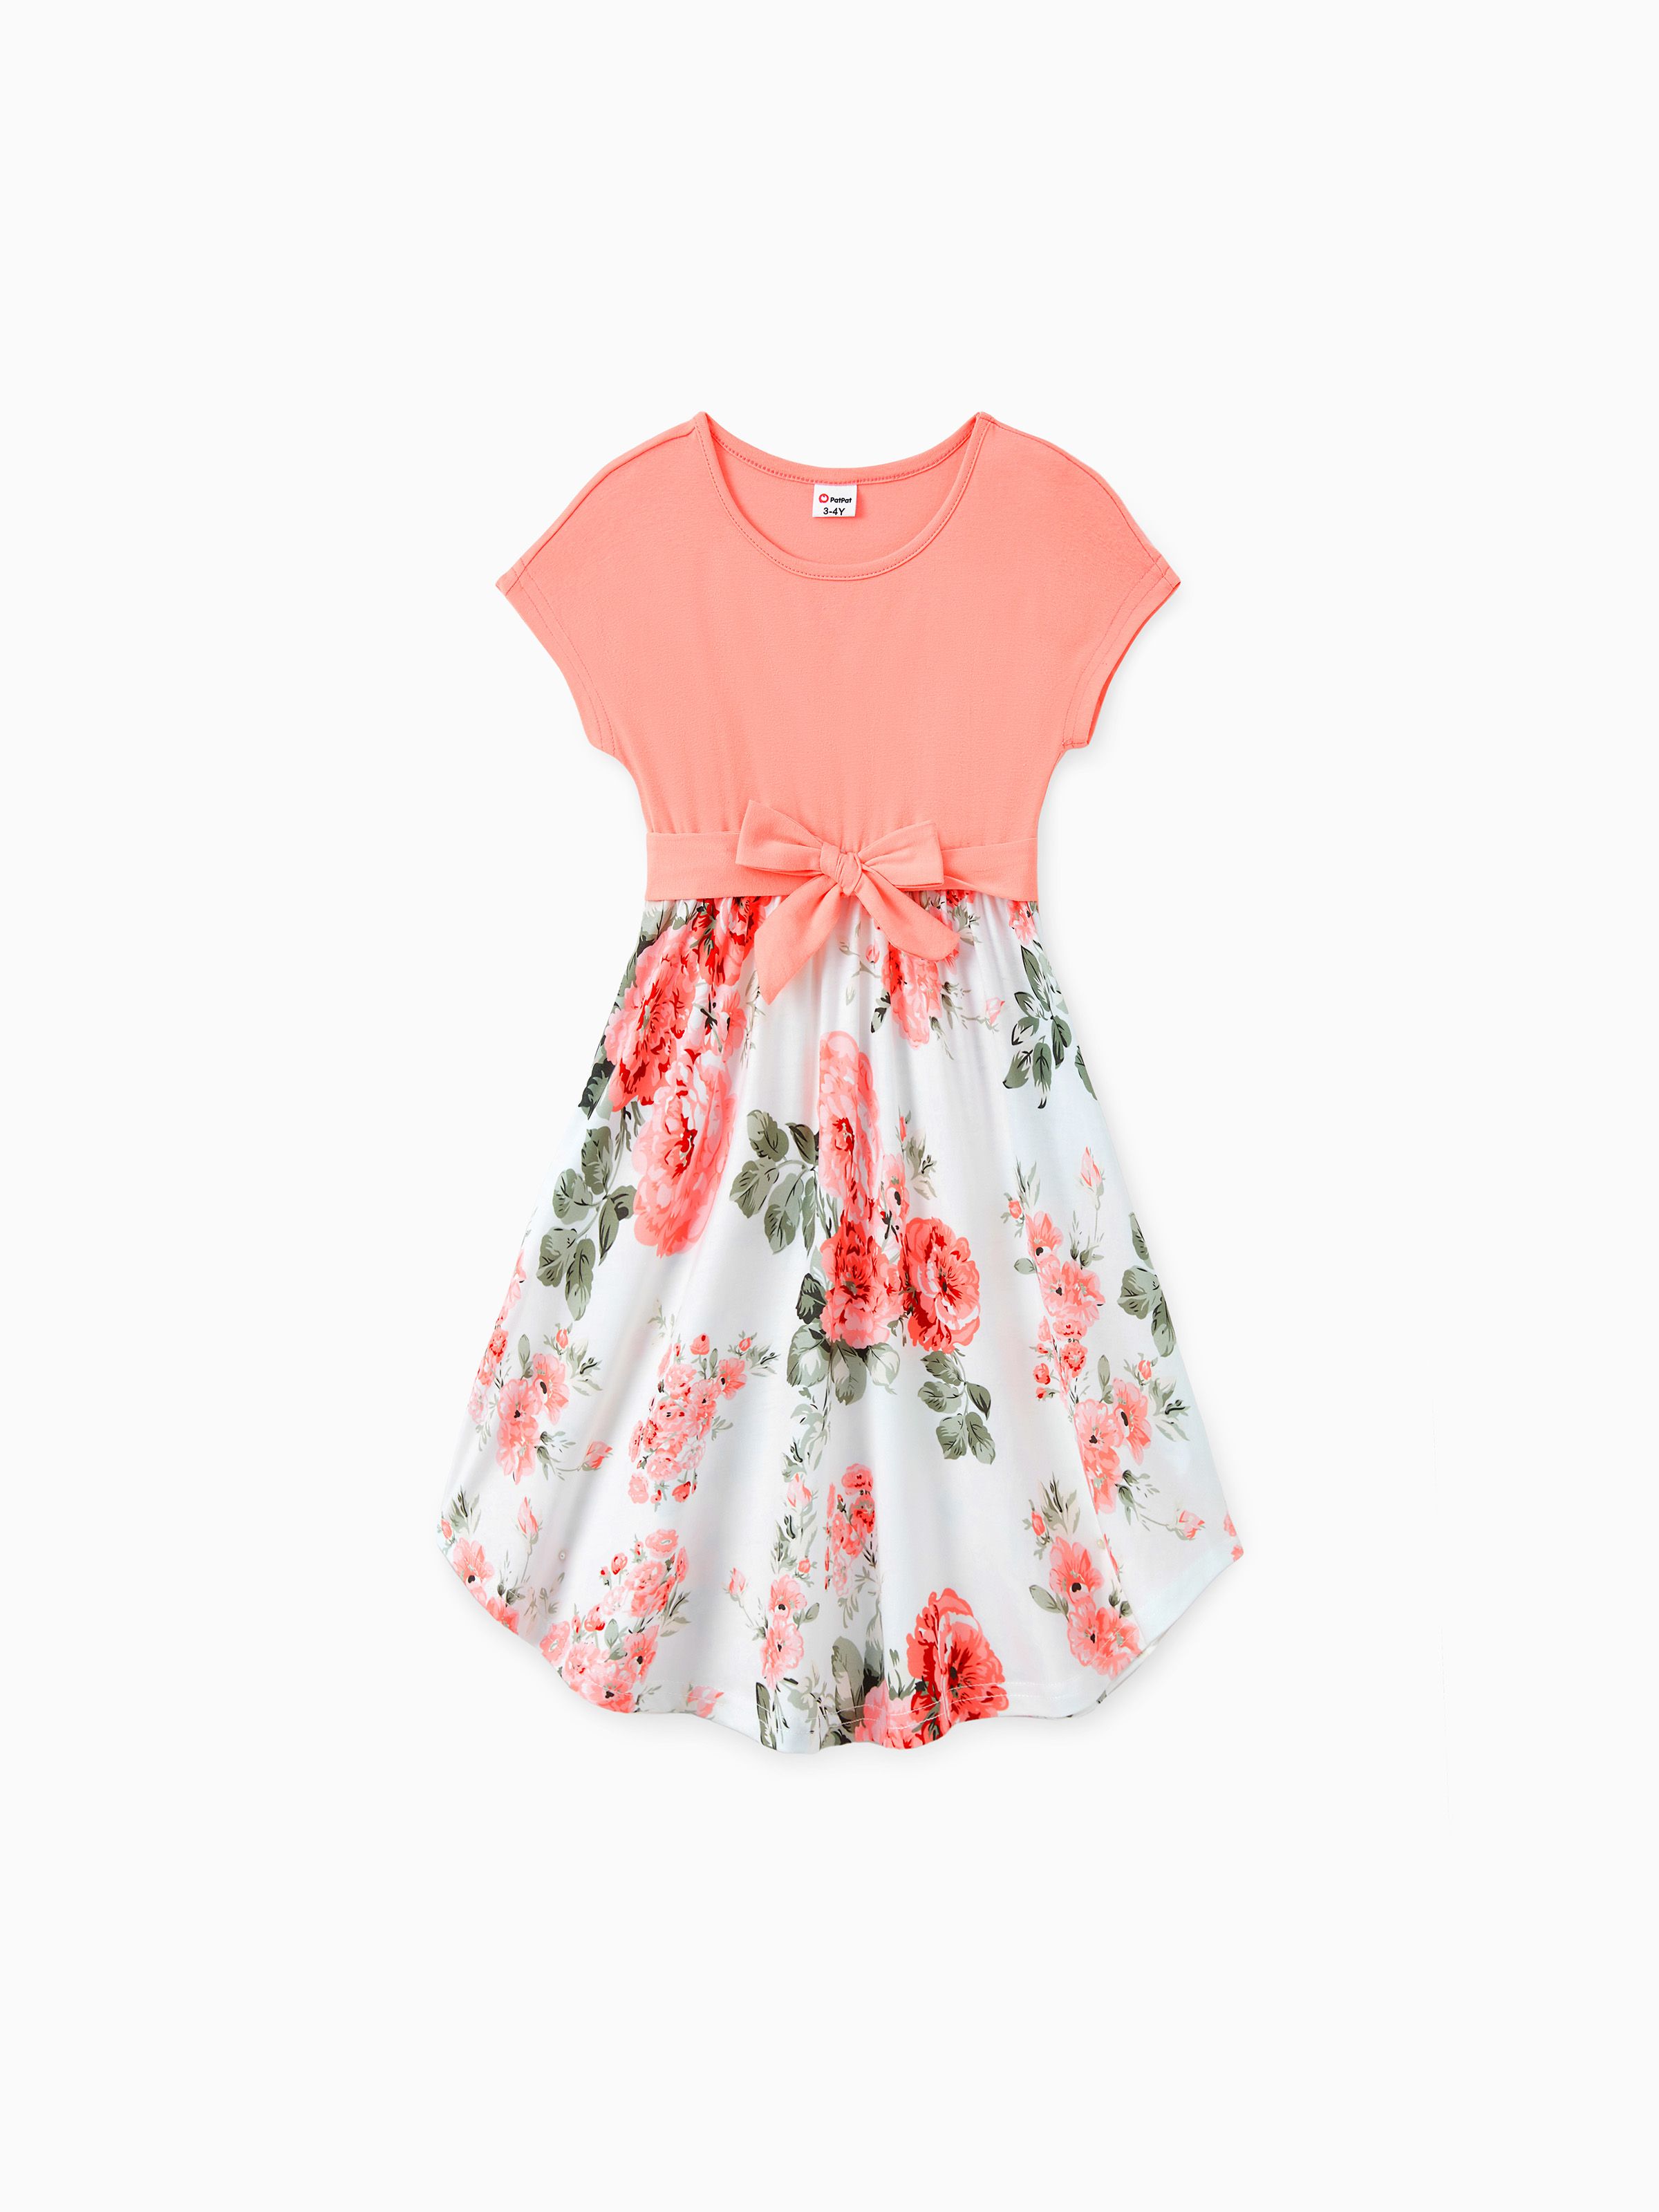 

Family Matching Sets Pinkish Orange Cap-sleeve Spliced Floral Dresses and Short-sleeve Color Block T-shirts